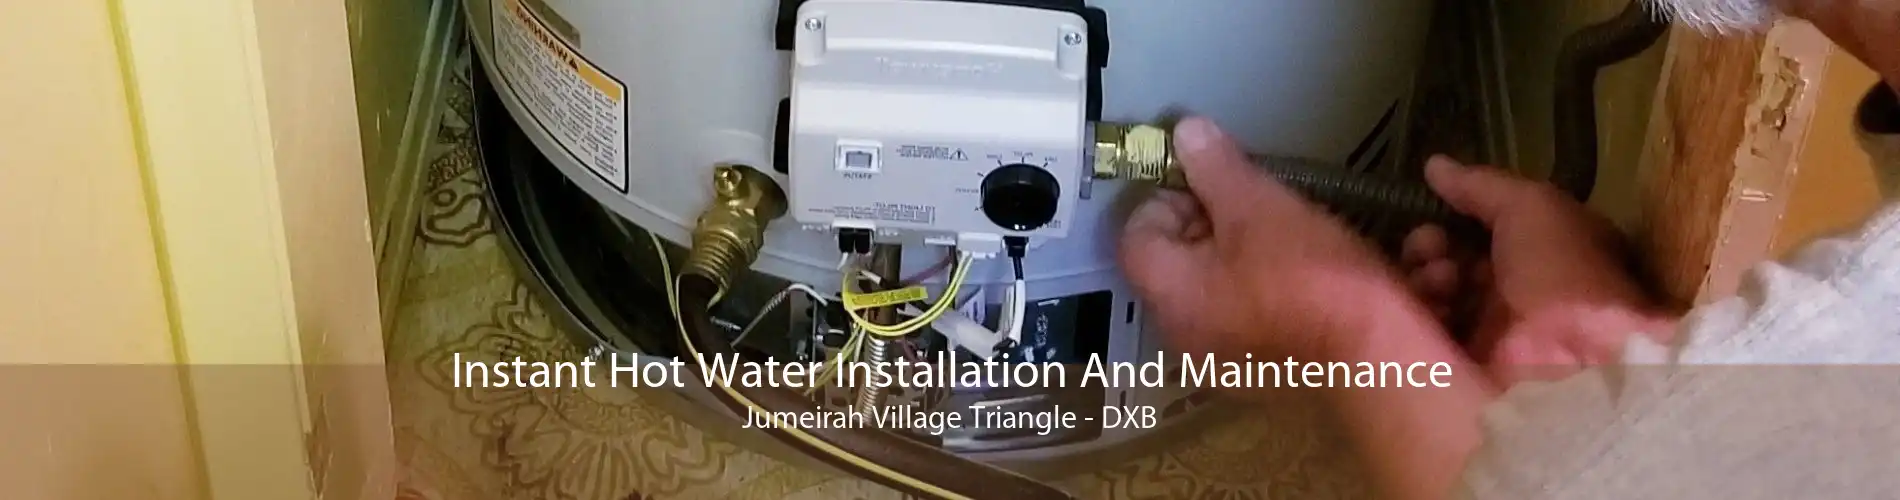 Instant Hot Water Installation And Maintenance Jumeirah Village Triangle - DXB